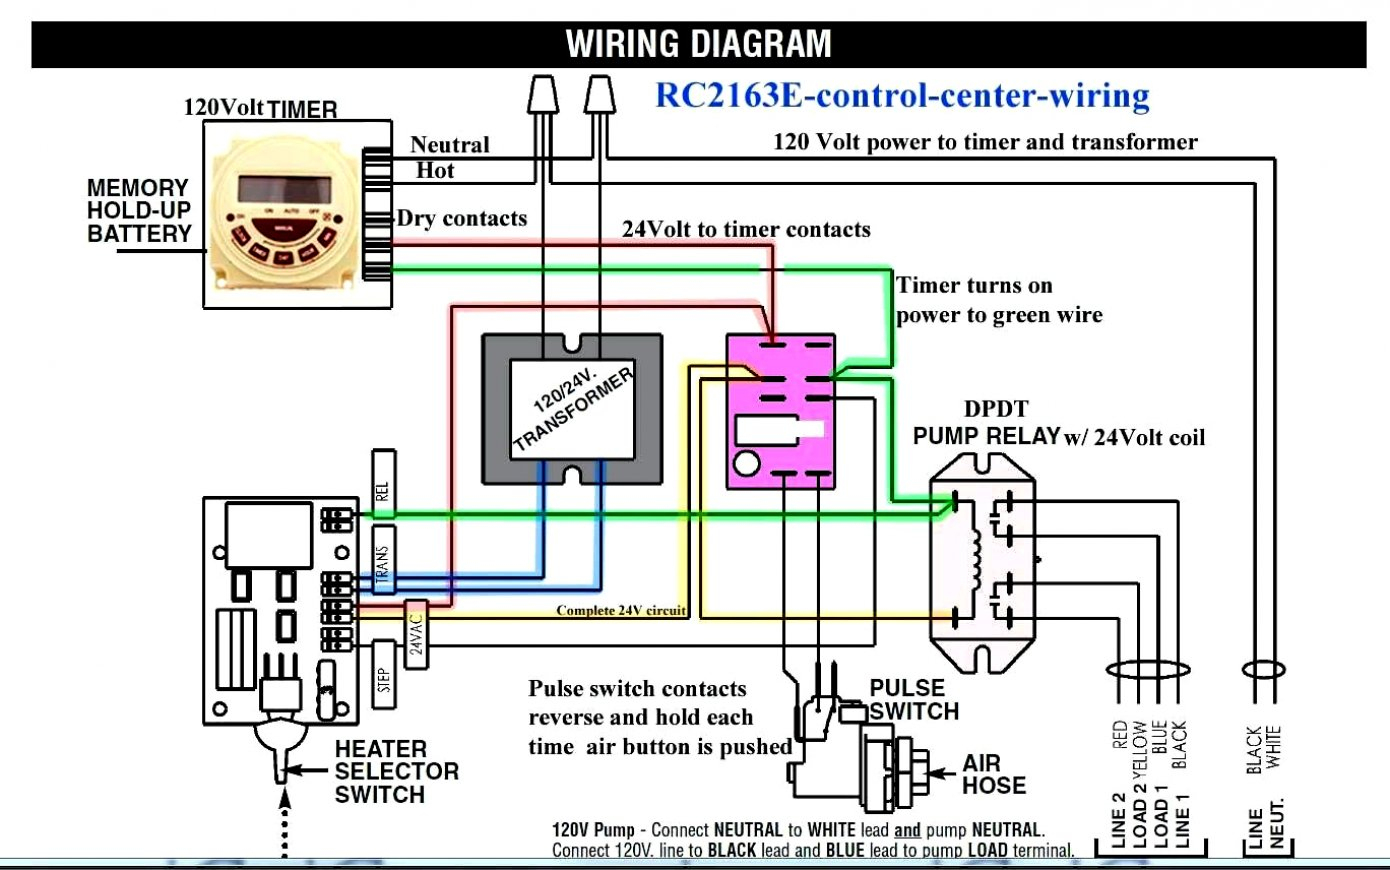 Wiring Diagram For 120V Pool Lights - Wiring Diagram Essig - Pool Light Transformer Wiring Diagram